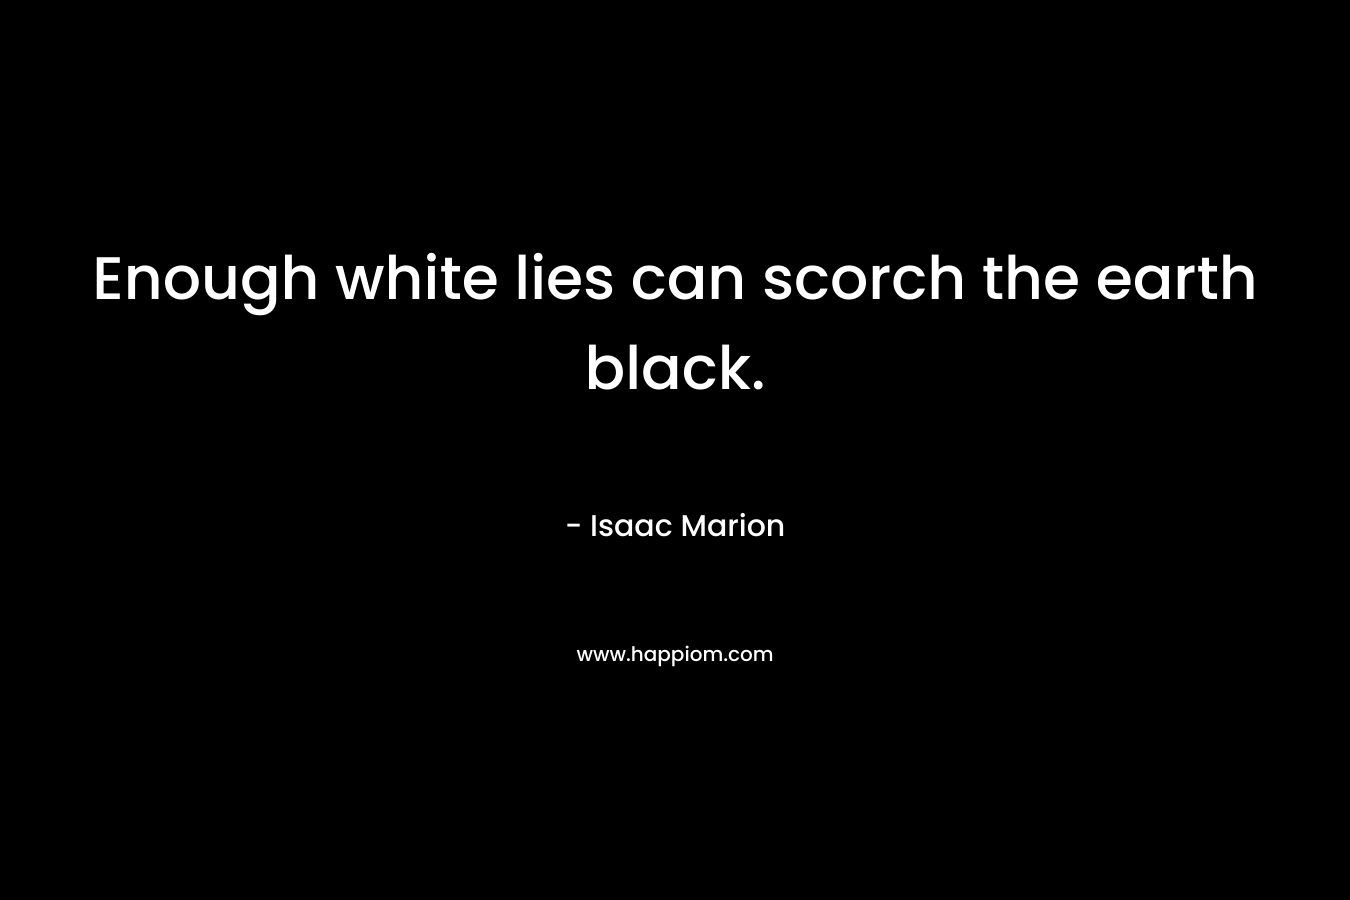 Enough white lies can scorch the earth black. – Isaac Marion